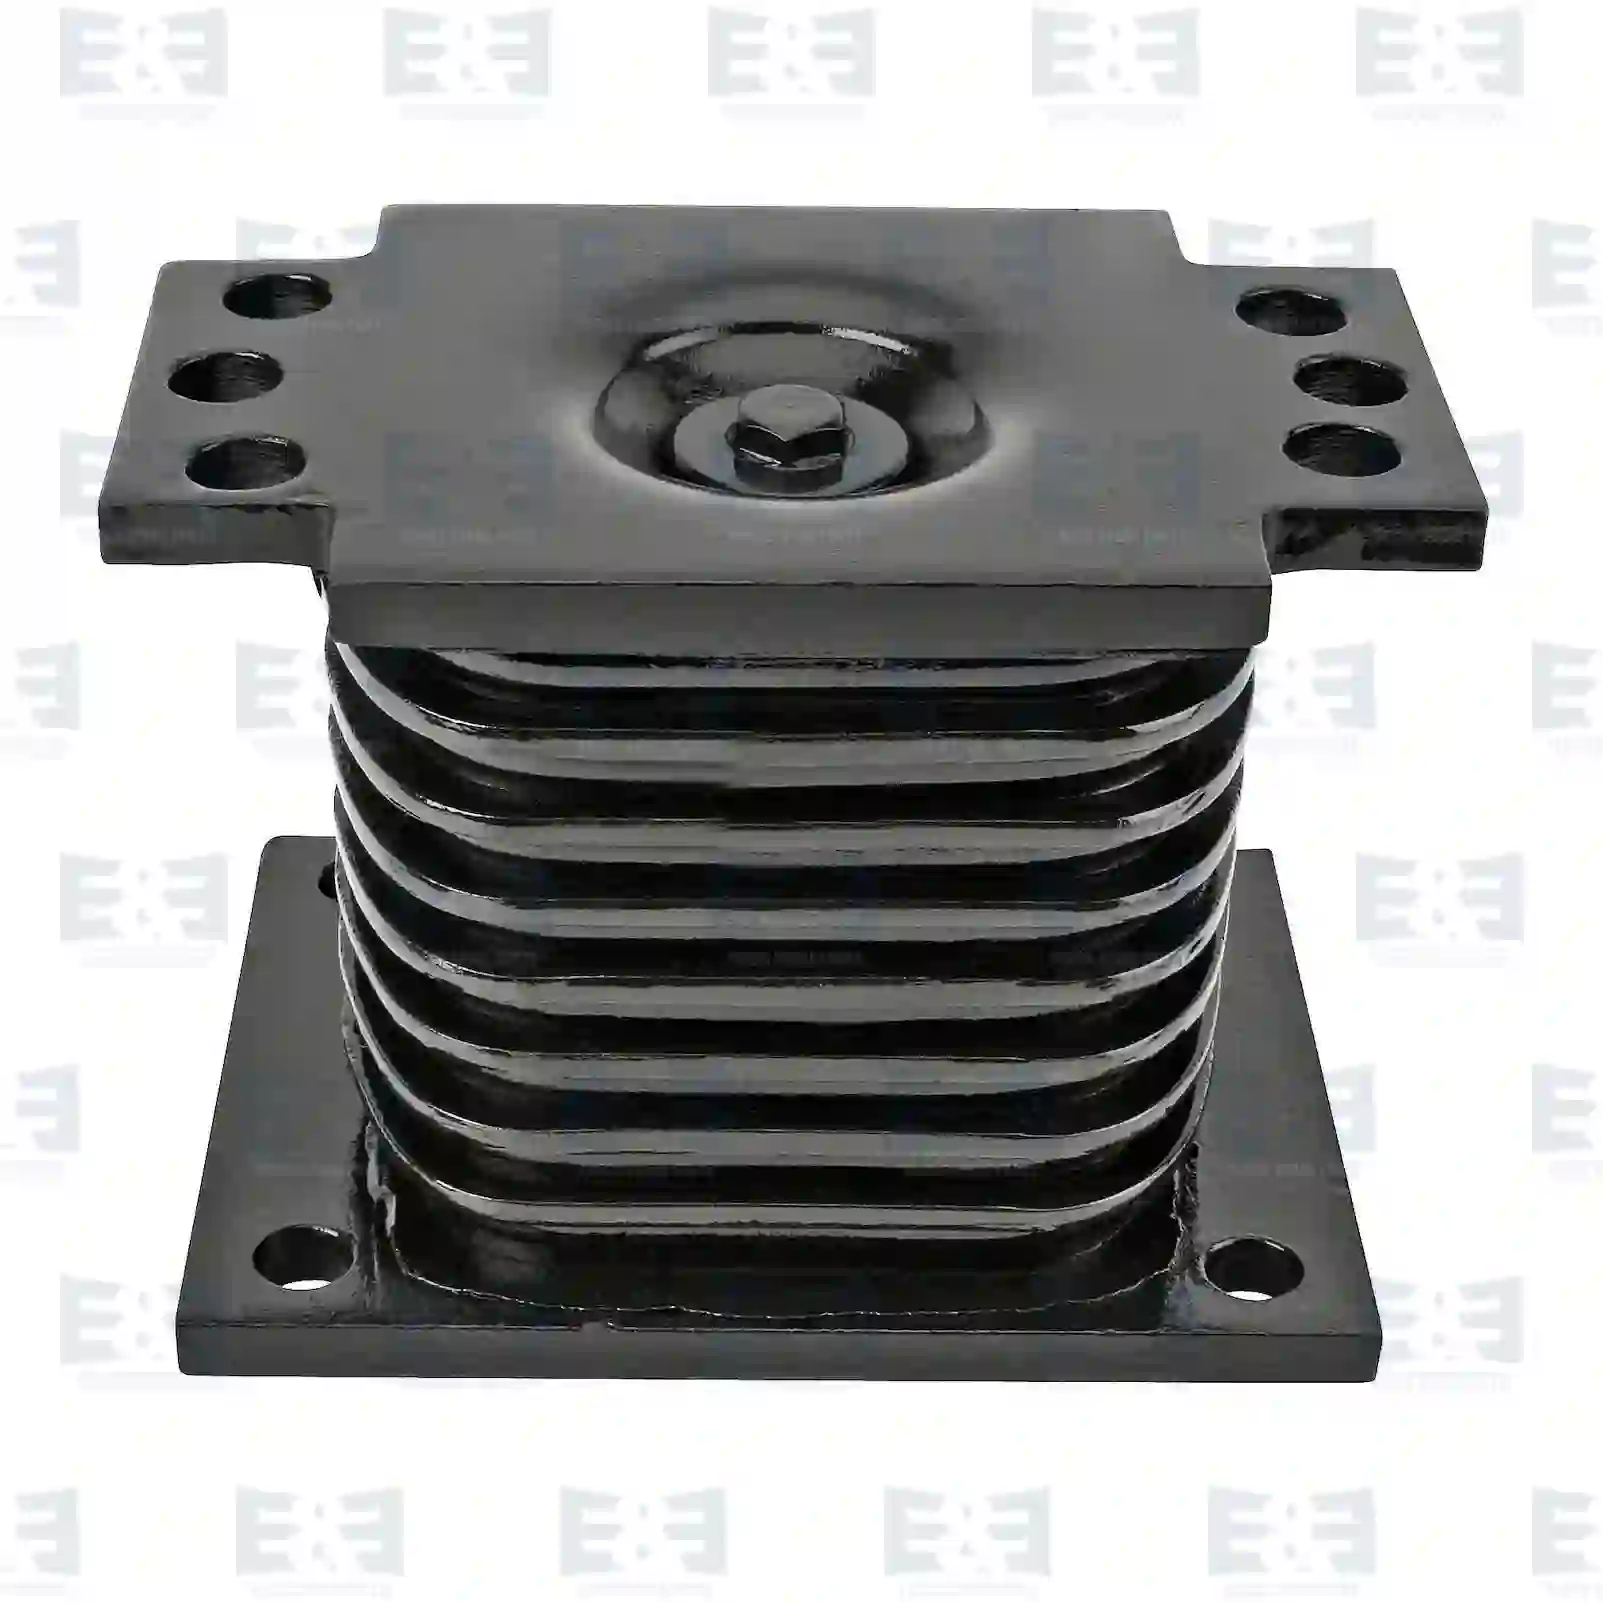 Rubber Buffer, Frame Hollow spring, EE No 2E2281062 ,  oem no:7420390836, 1089501, 1577873, 1609657, 1622982, 1629553, 20390836, 8151413, ZG41257-0008 E&E Truck Spare Parts | Truck Spare Parts, Auotomotive Spare Parts